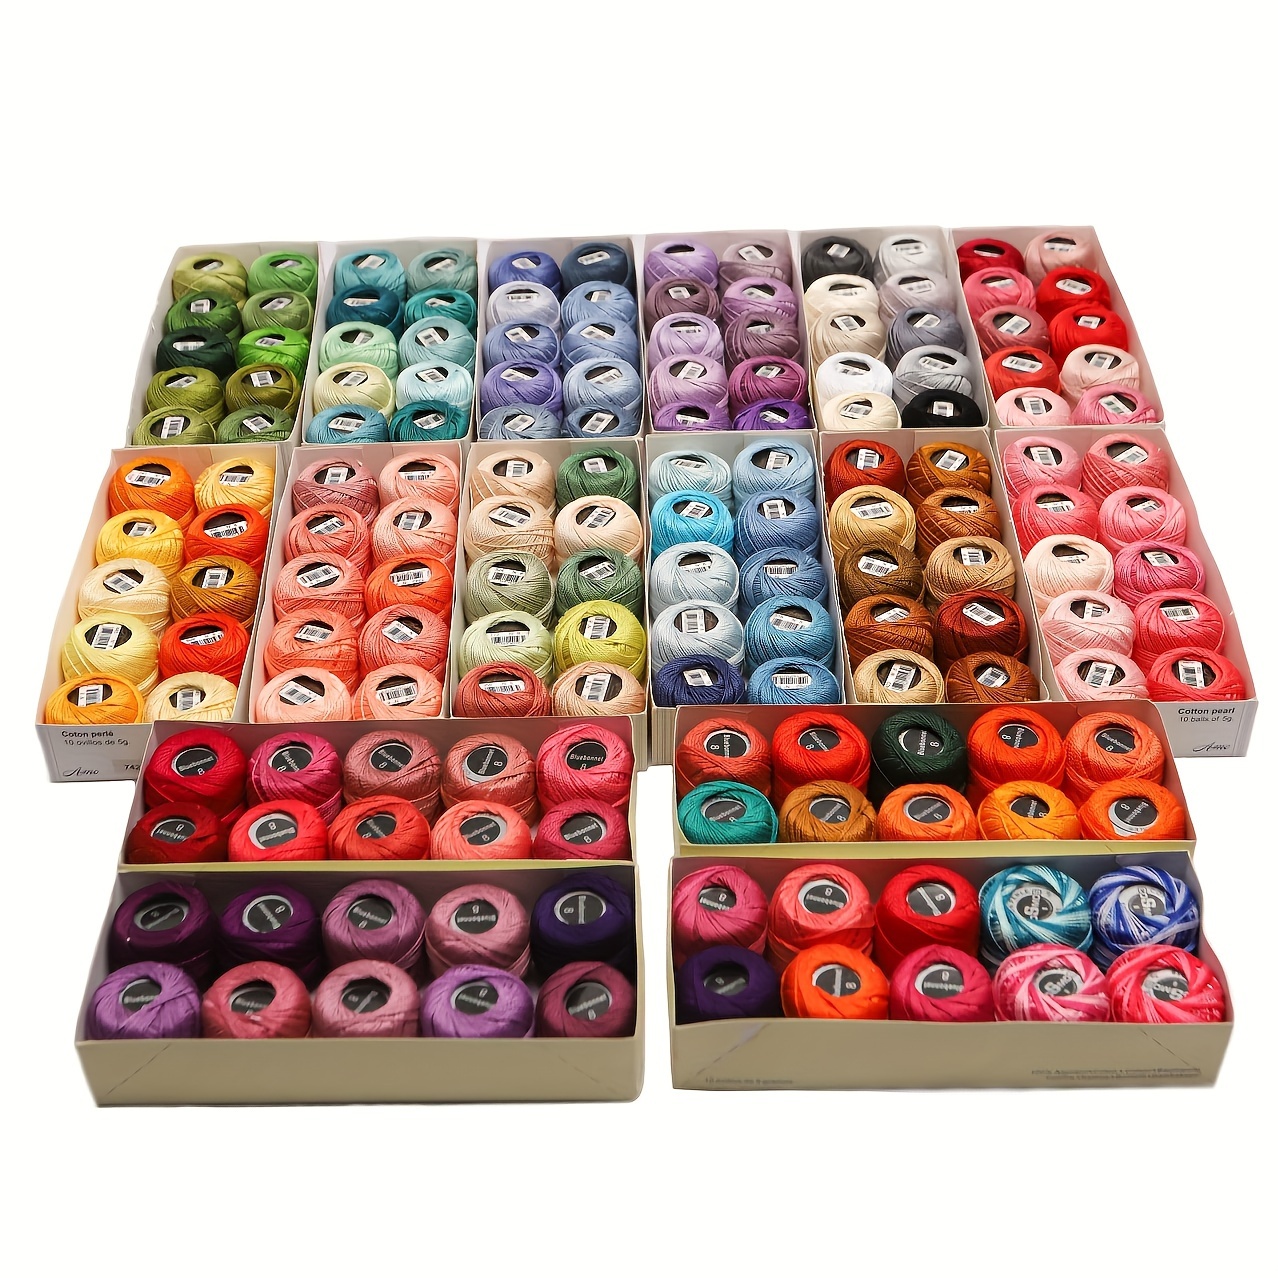 

Crochet Thread Set - 10 Multicolor Lace Yarns, Long-staple Cotton, 5g, 40m Each - Perfect For Crochet Projects And Handicrafts